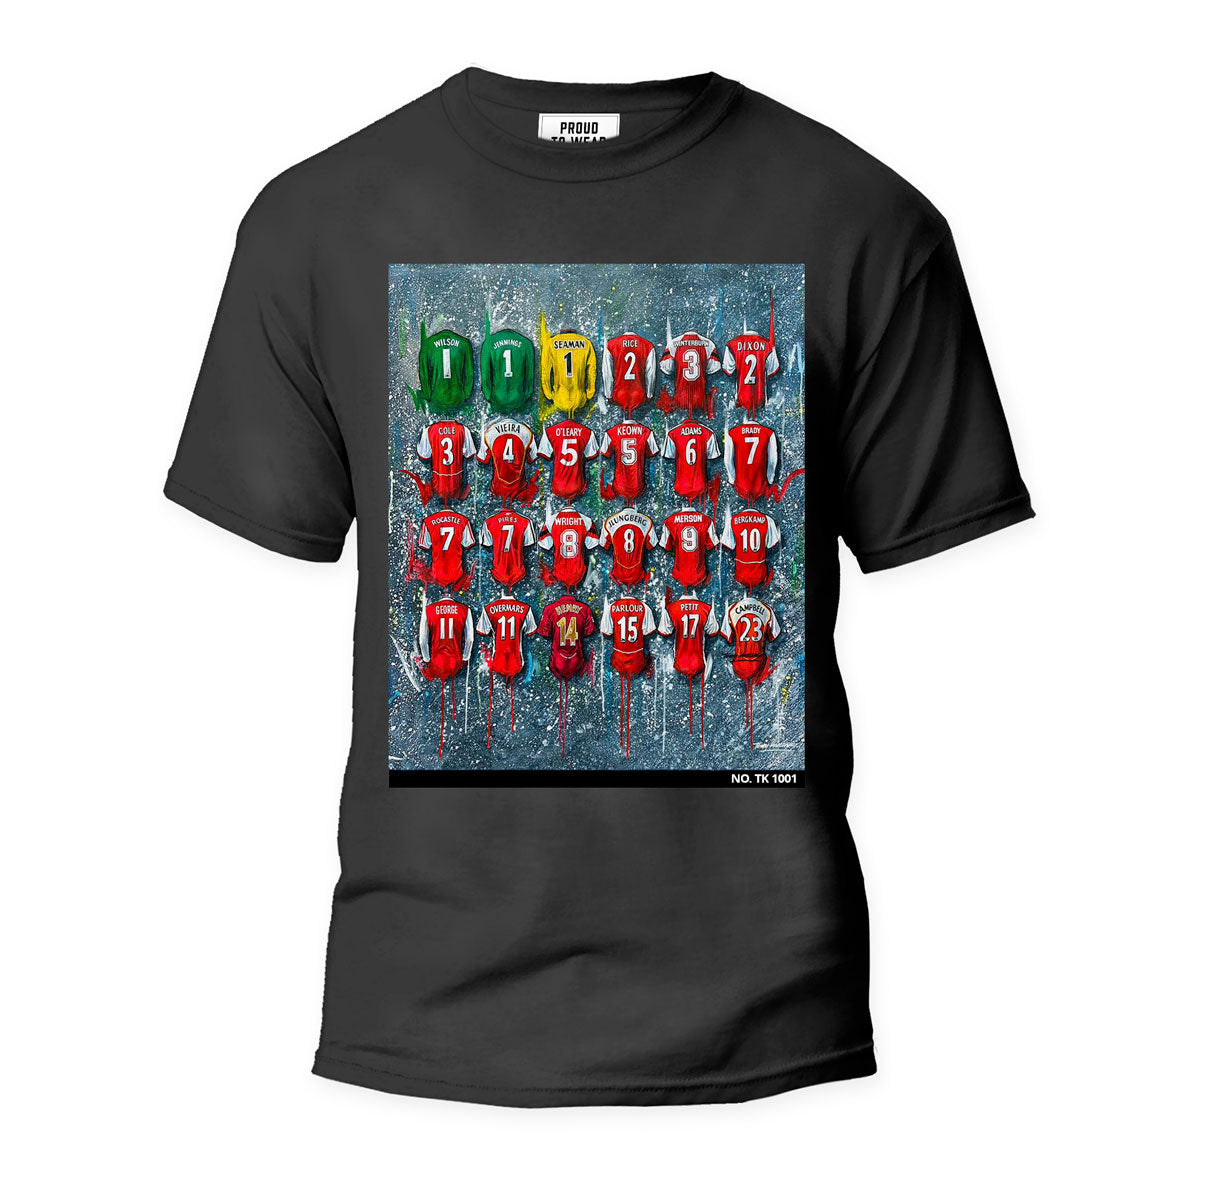 These Arsenal Legends T-shirts feature Terry Kneeshaw's artwork for the team, showcasing iconic players from the club's history. The one-of-a-kind T-shirts are individually numbered and come in sizes from xxs to xxxl. Choose between a black or white T-shirt to match your style. These unique T-shirts are a must-have for any Arsenal fan or football memorabilia collector, and the high-quality artwork captures the team's rich history in style.